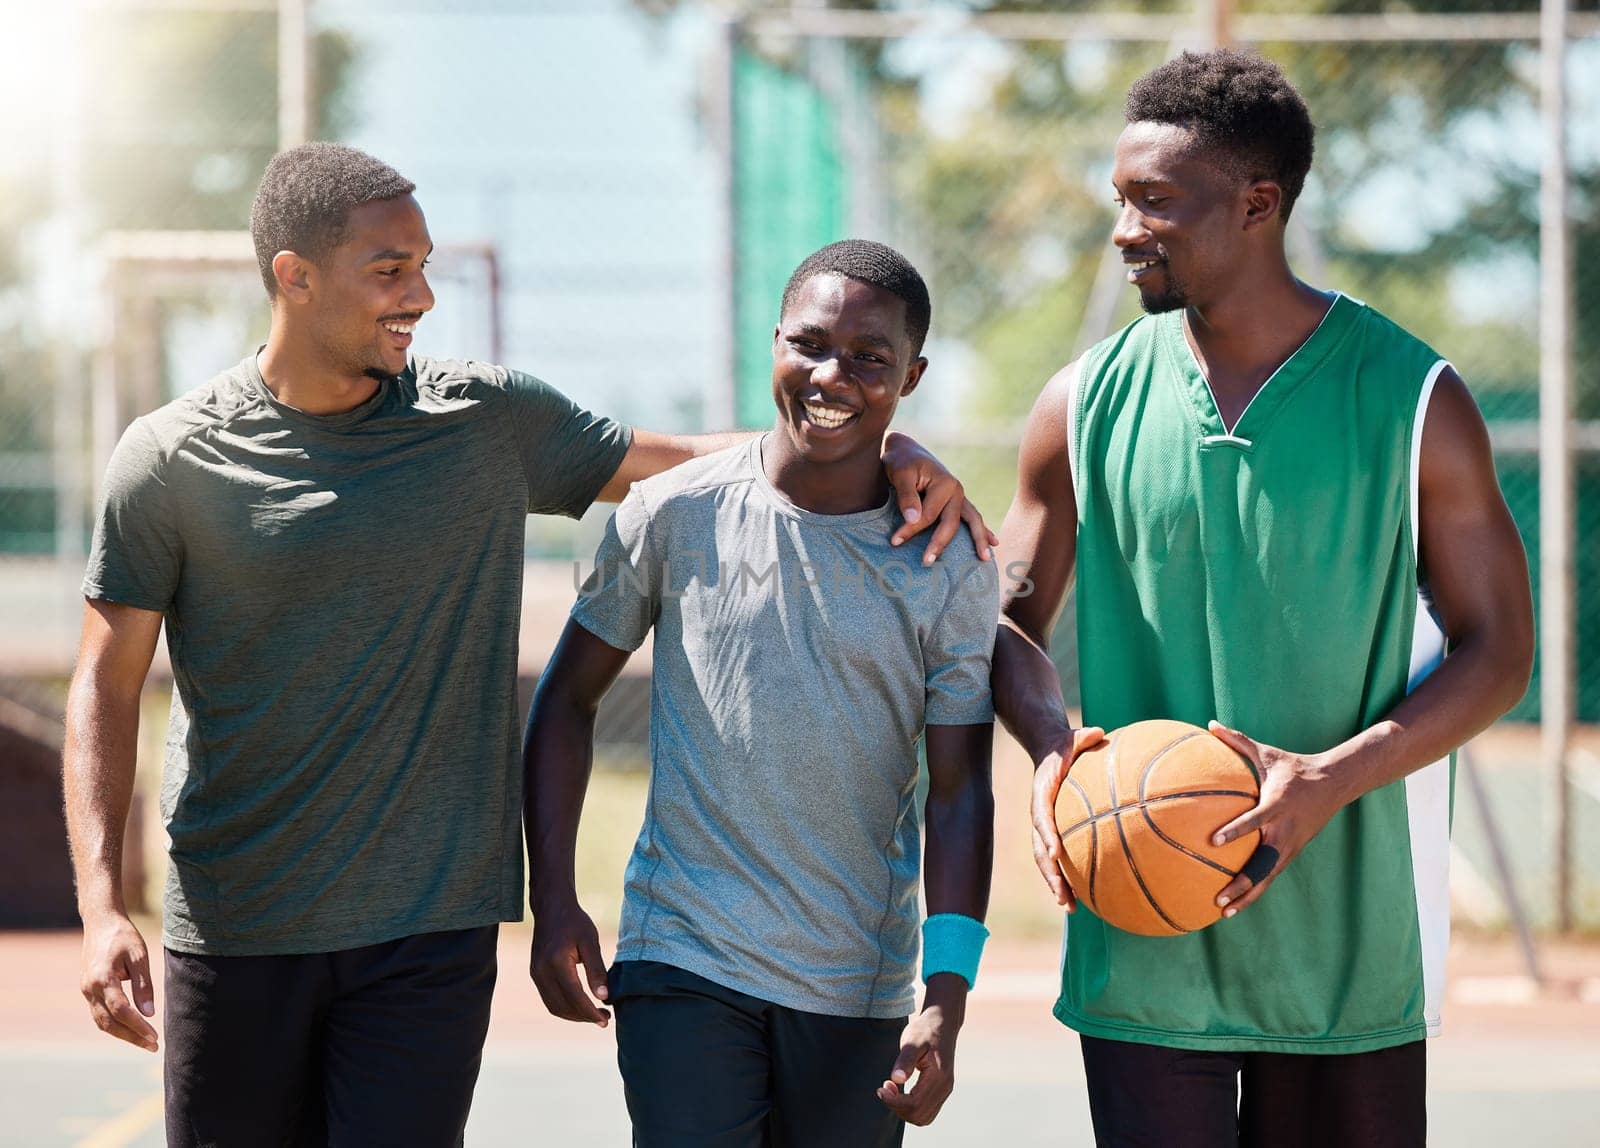 Basketball player, happy friends and walking together in conversation, training or exercise in summer. Team happiness, basketball court and basketball for black man group, outdoor or game in sunshine.